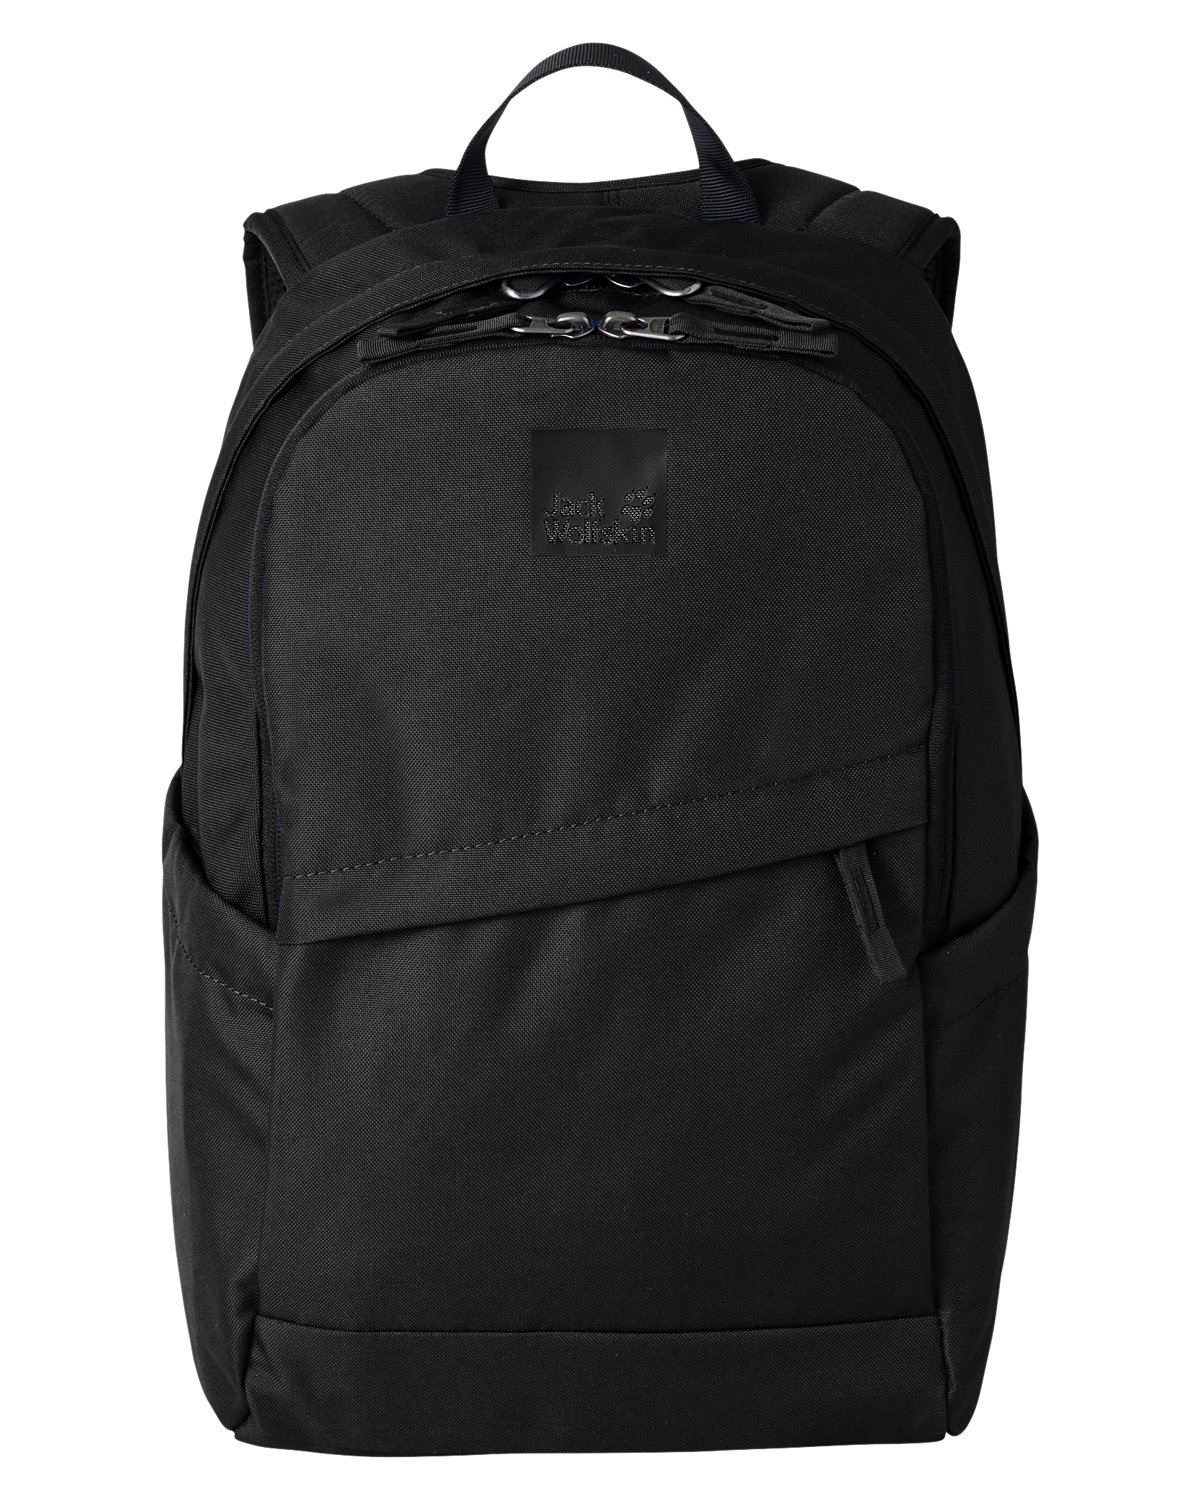 Perfect Day Backpack-Jack Wolfskin